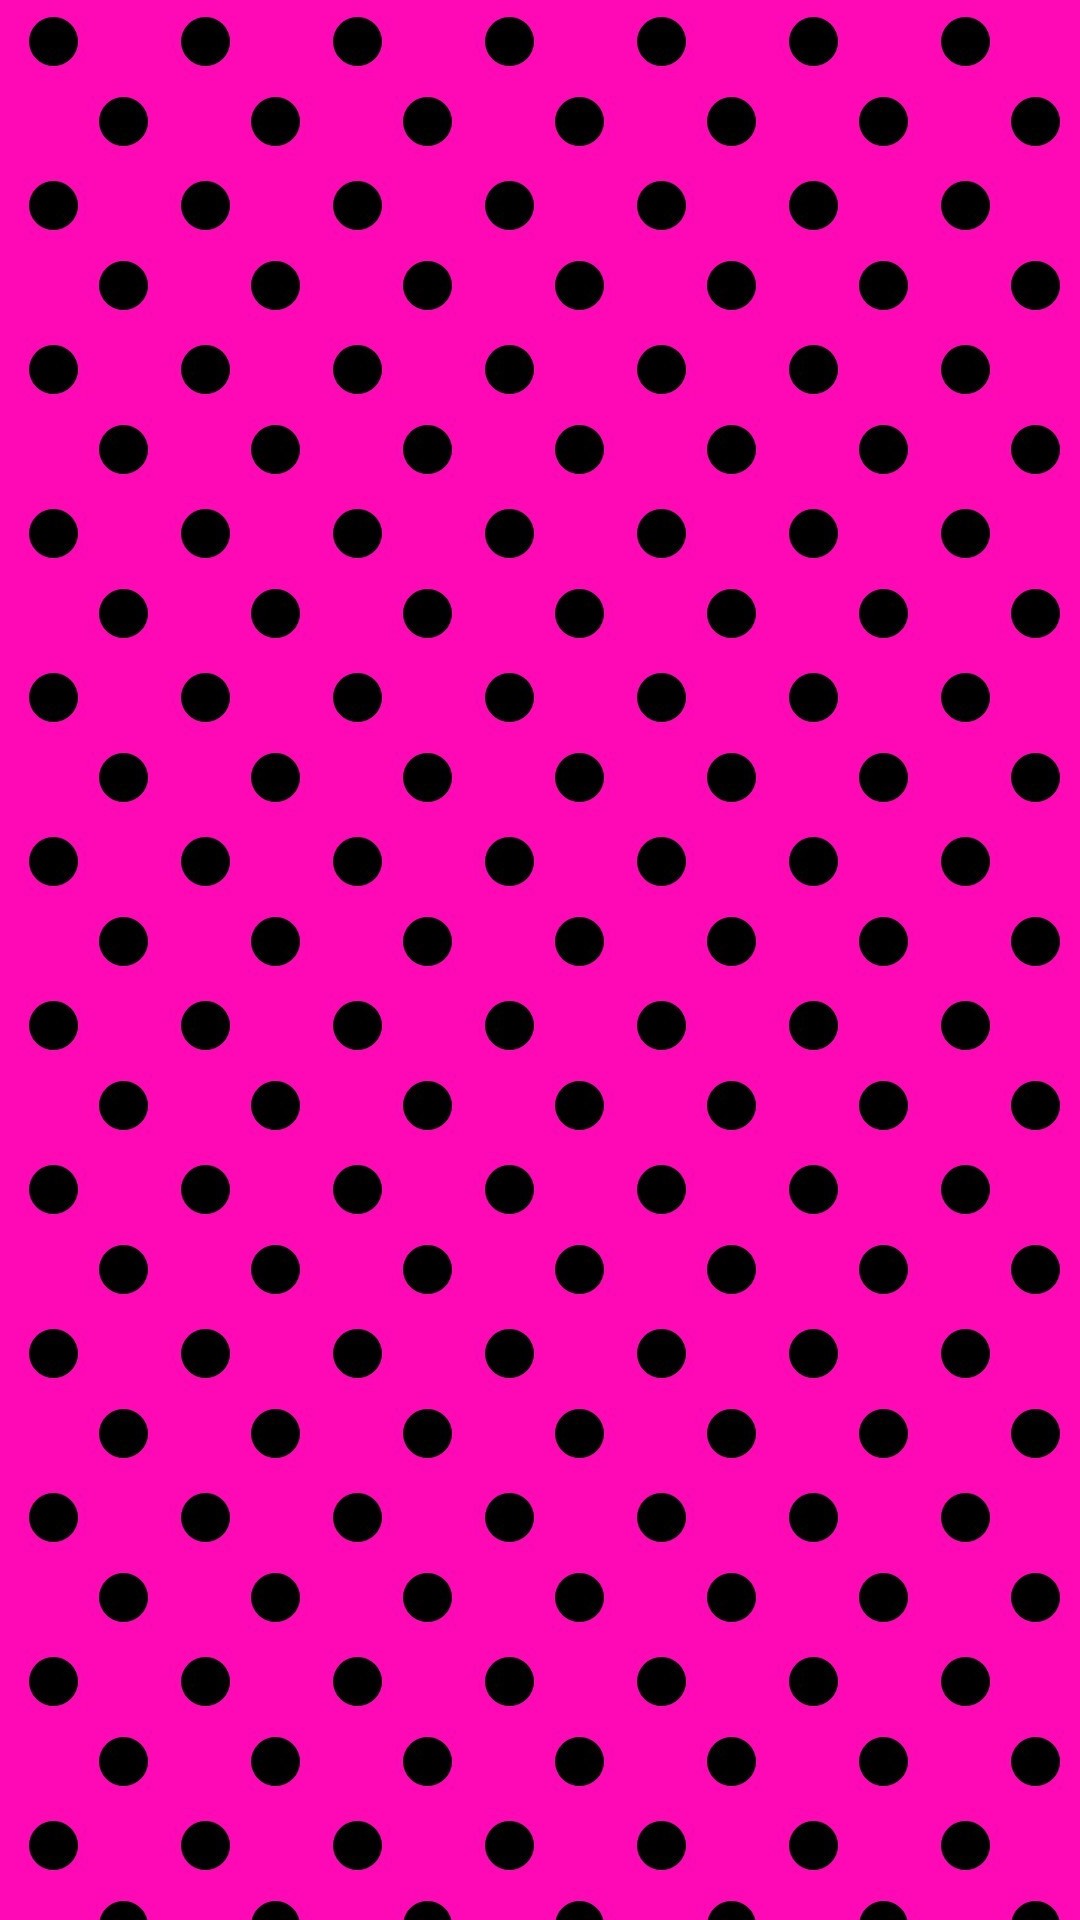 Pink Dots Android Wallpaper with HD resolution 1080x1920